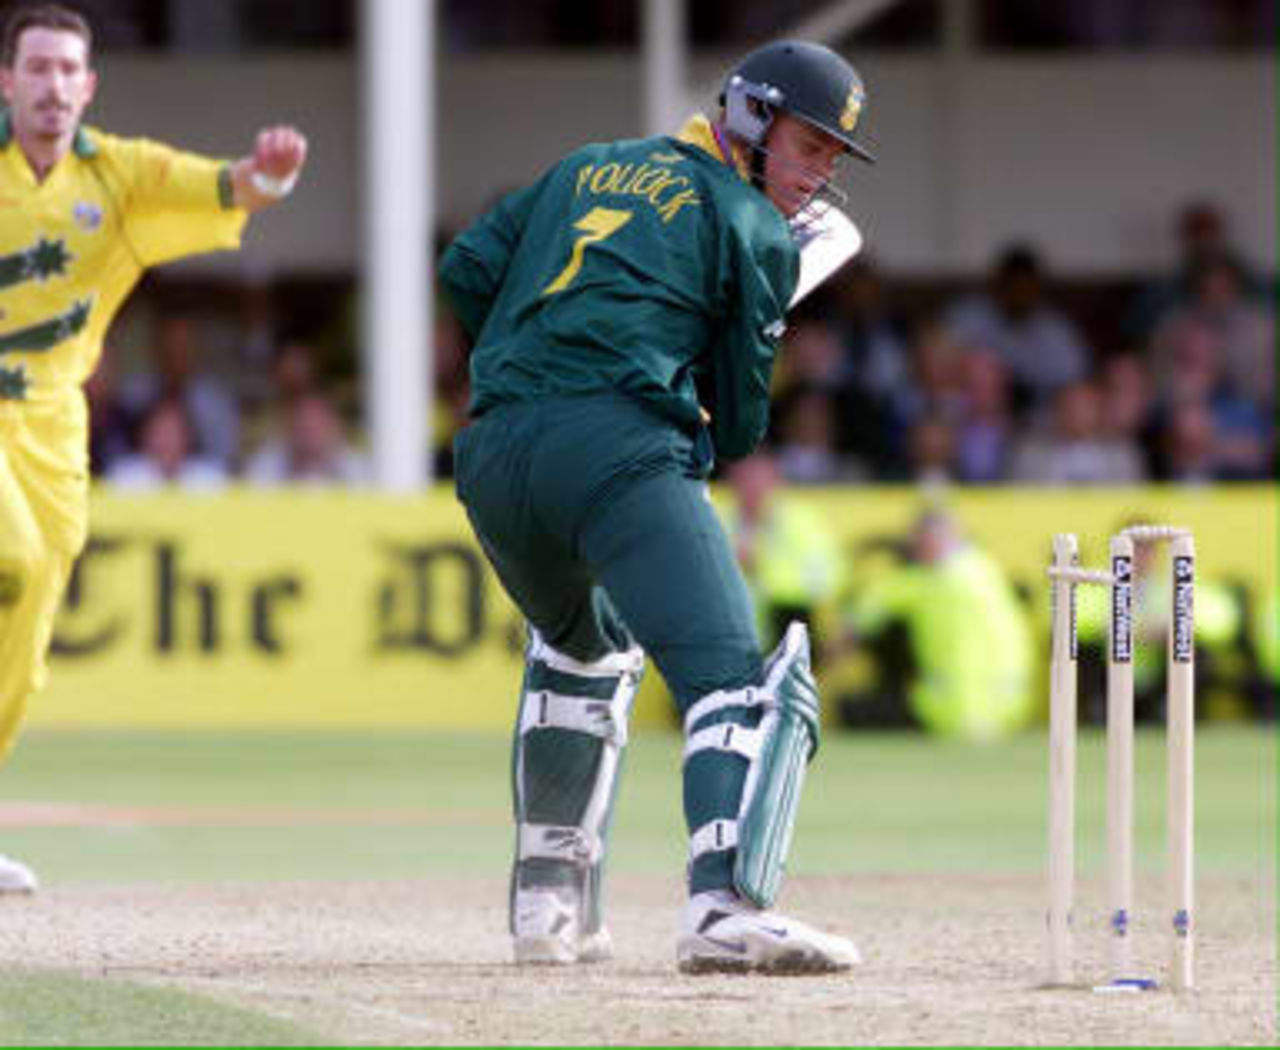 Shaun Pollock is out clean bowled by Australian's Damien Fleming before victory over South Africa during their semi-final match in the Cricket World Cup at Edgbaston, Birmingham, 17 June 1999.